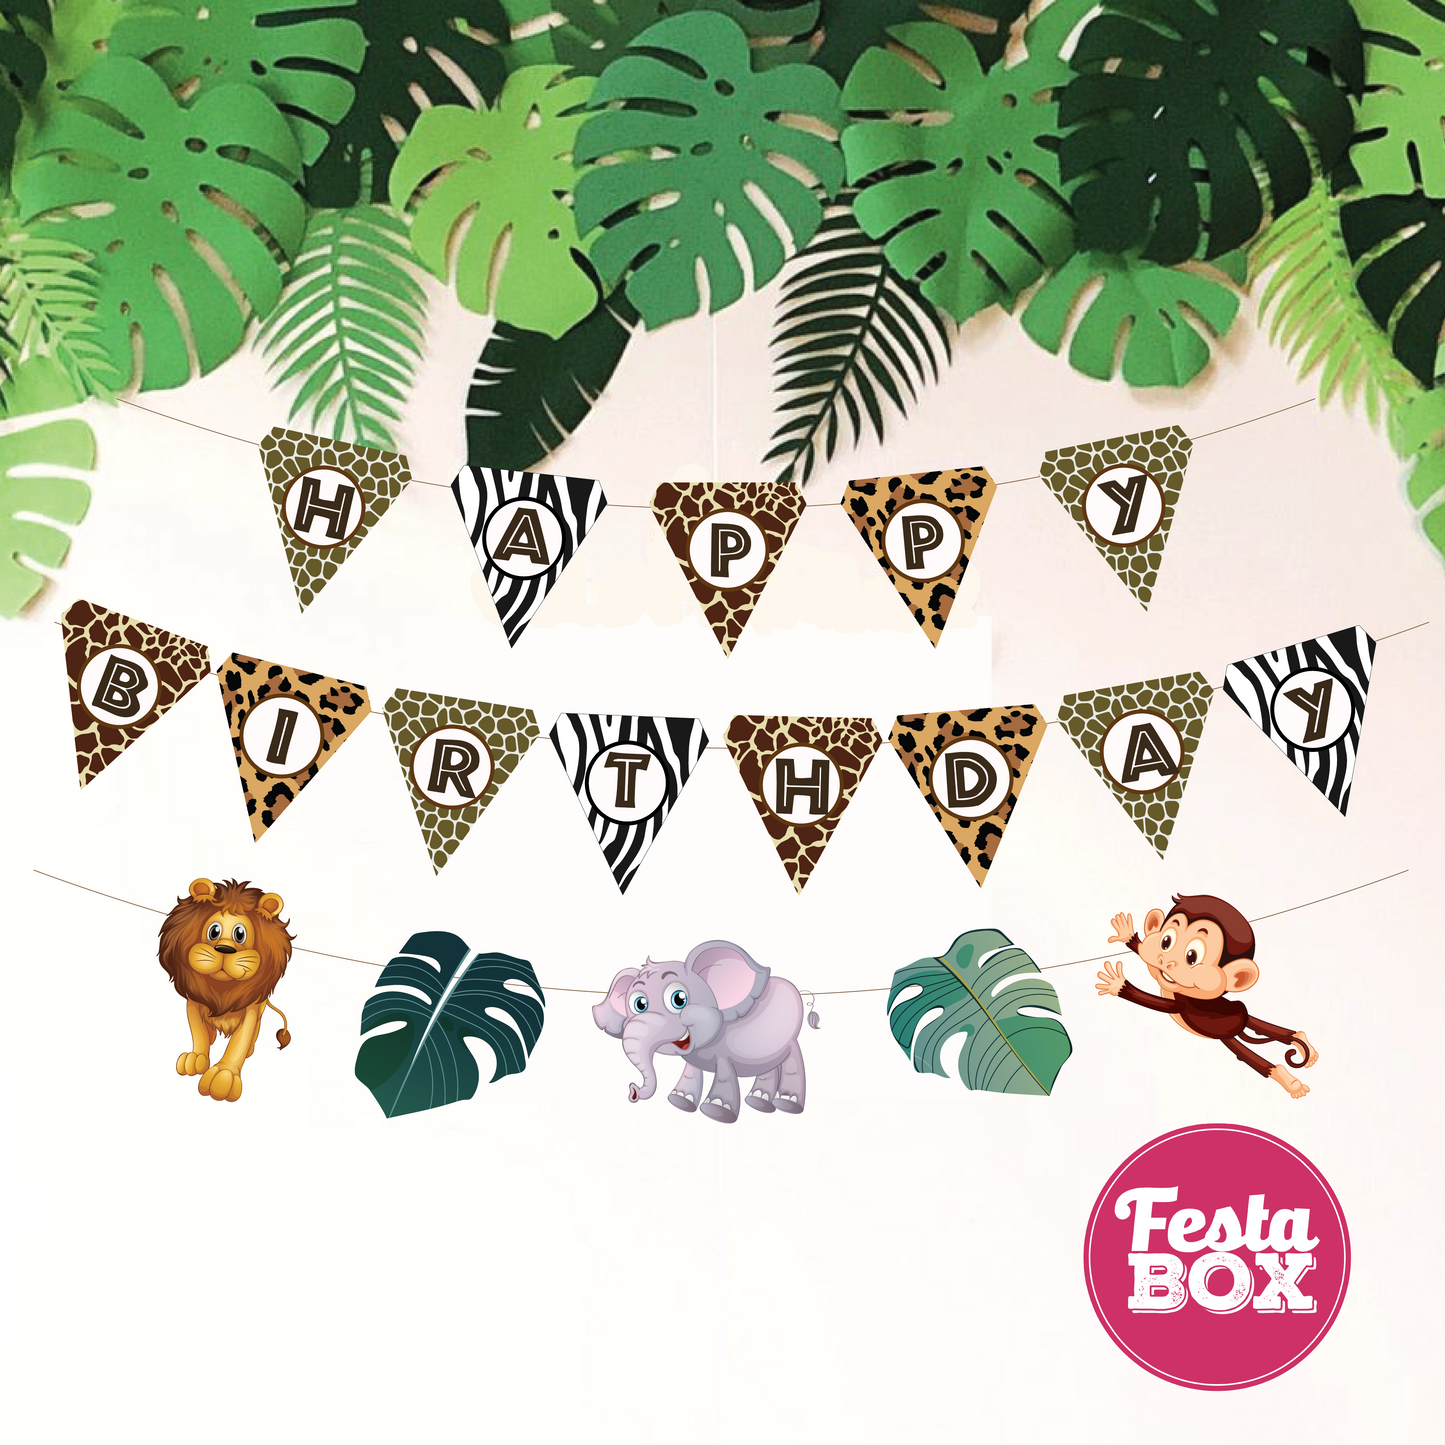 Background Banner for Birthday Party Decoration – Jungle Safari Theme